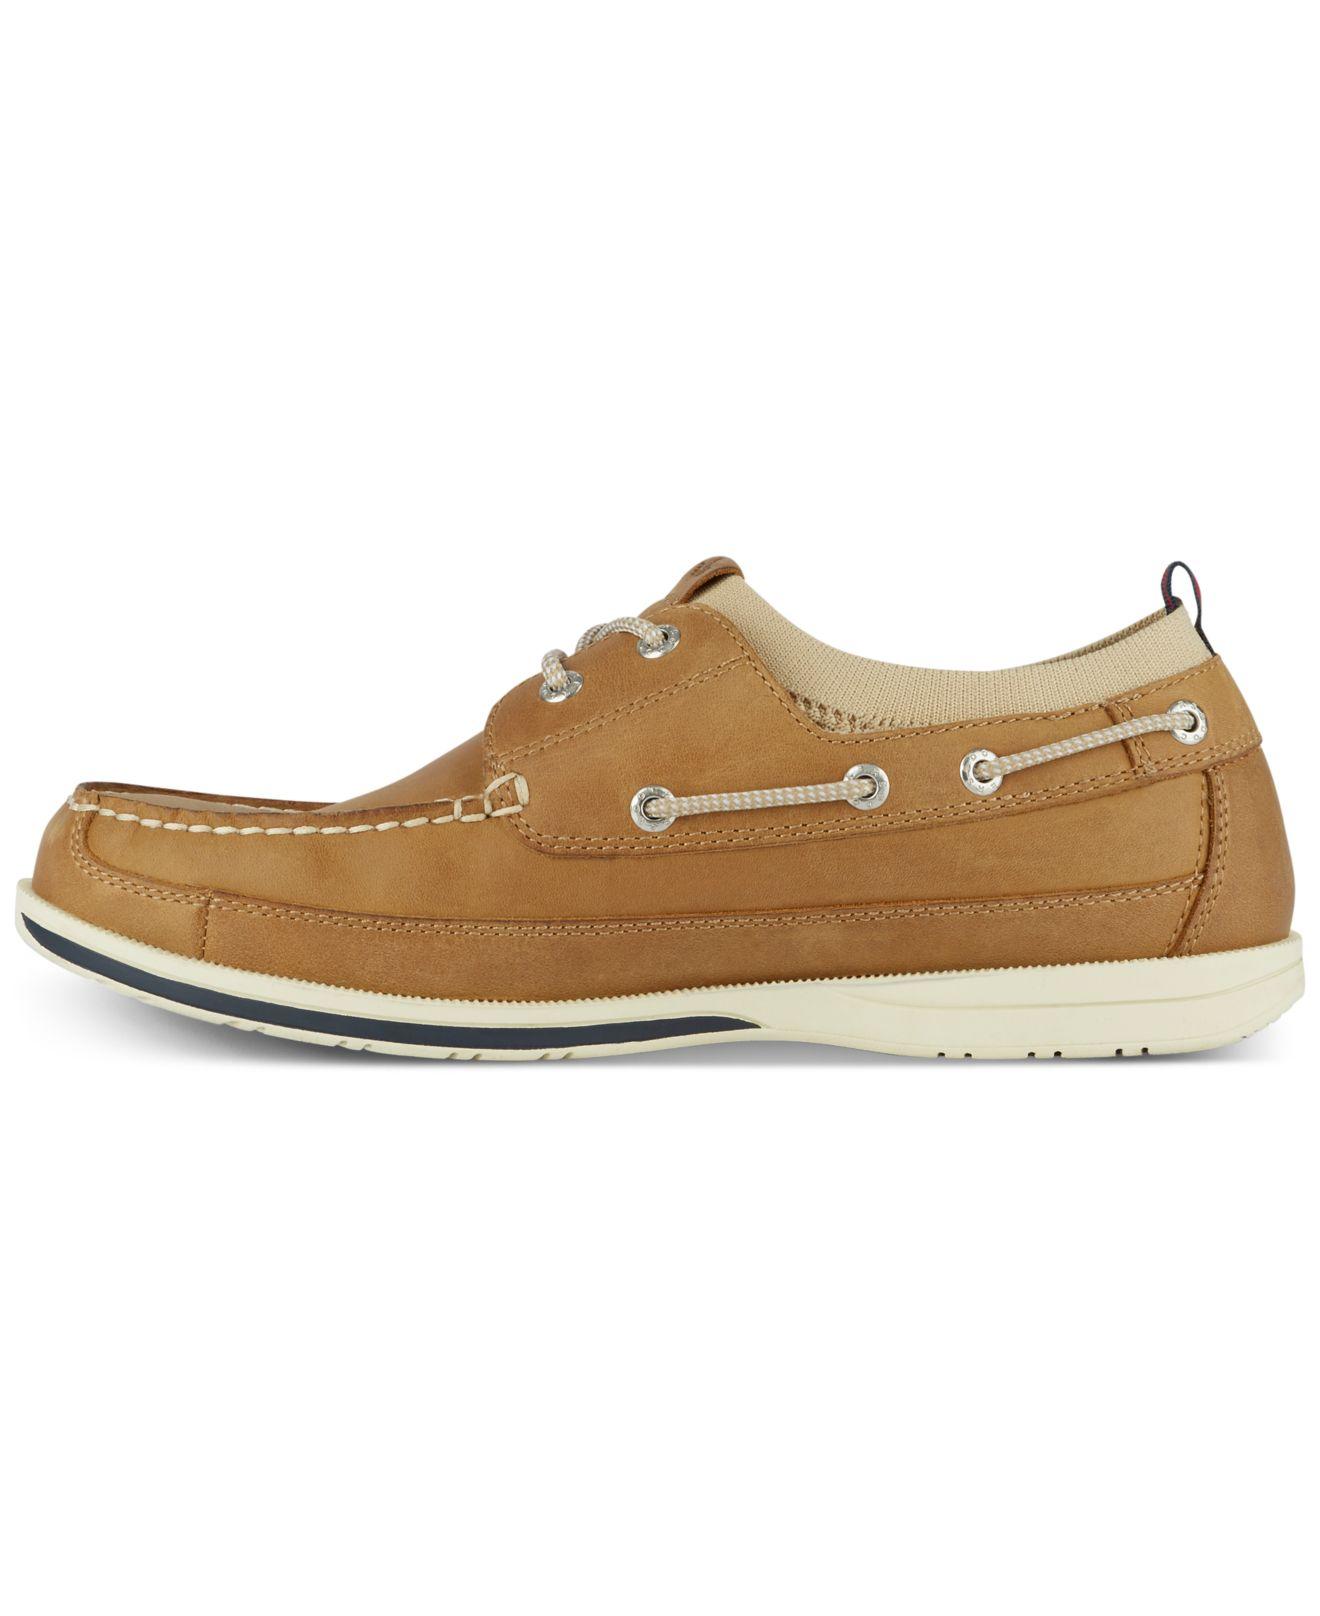 Dockers Homer Smart Series Leather Boat Shoes in Brown for Men - Lyst